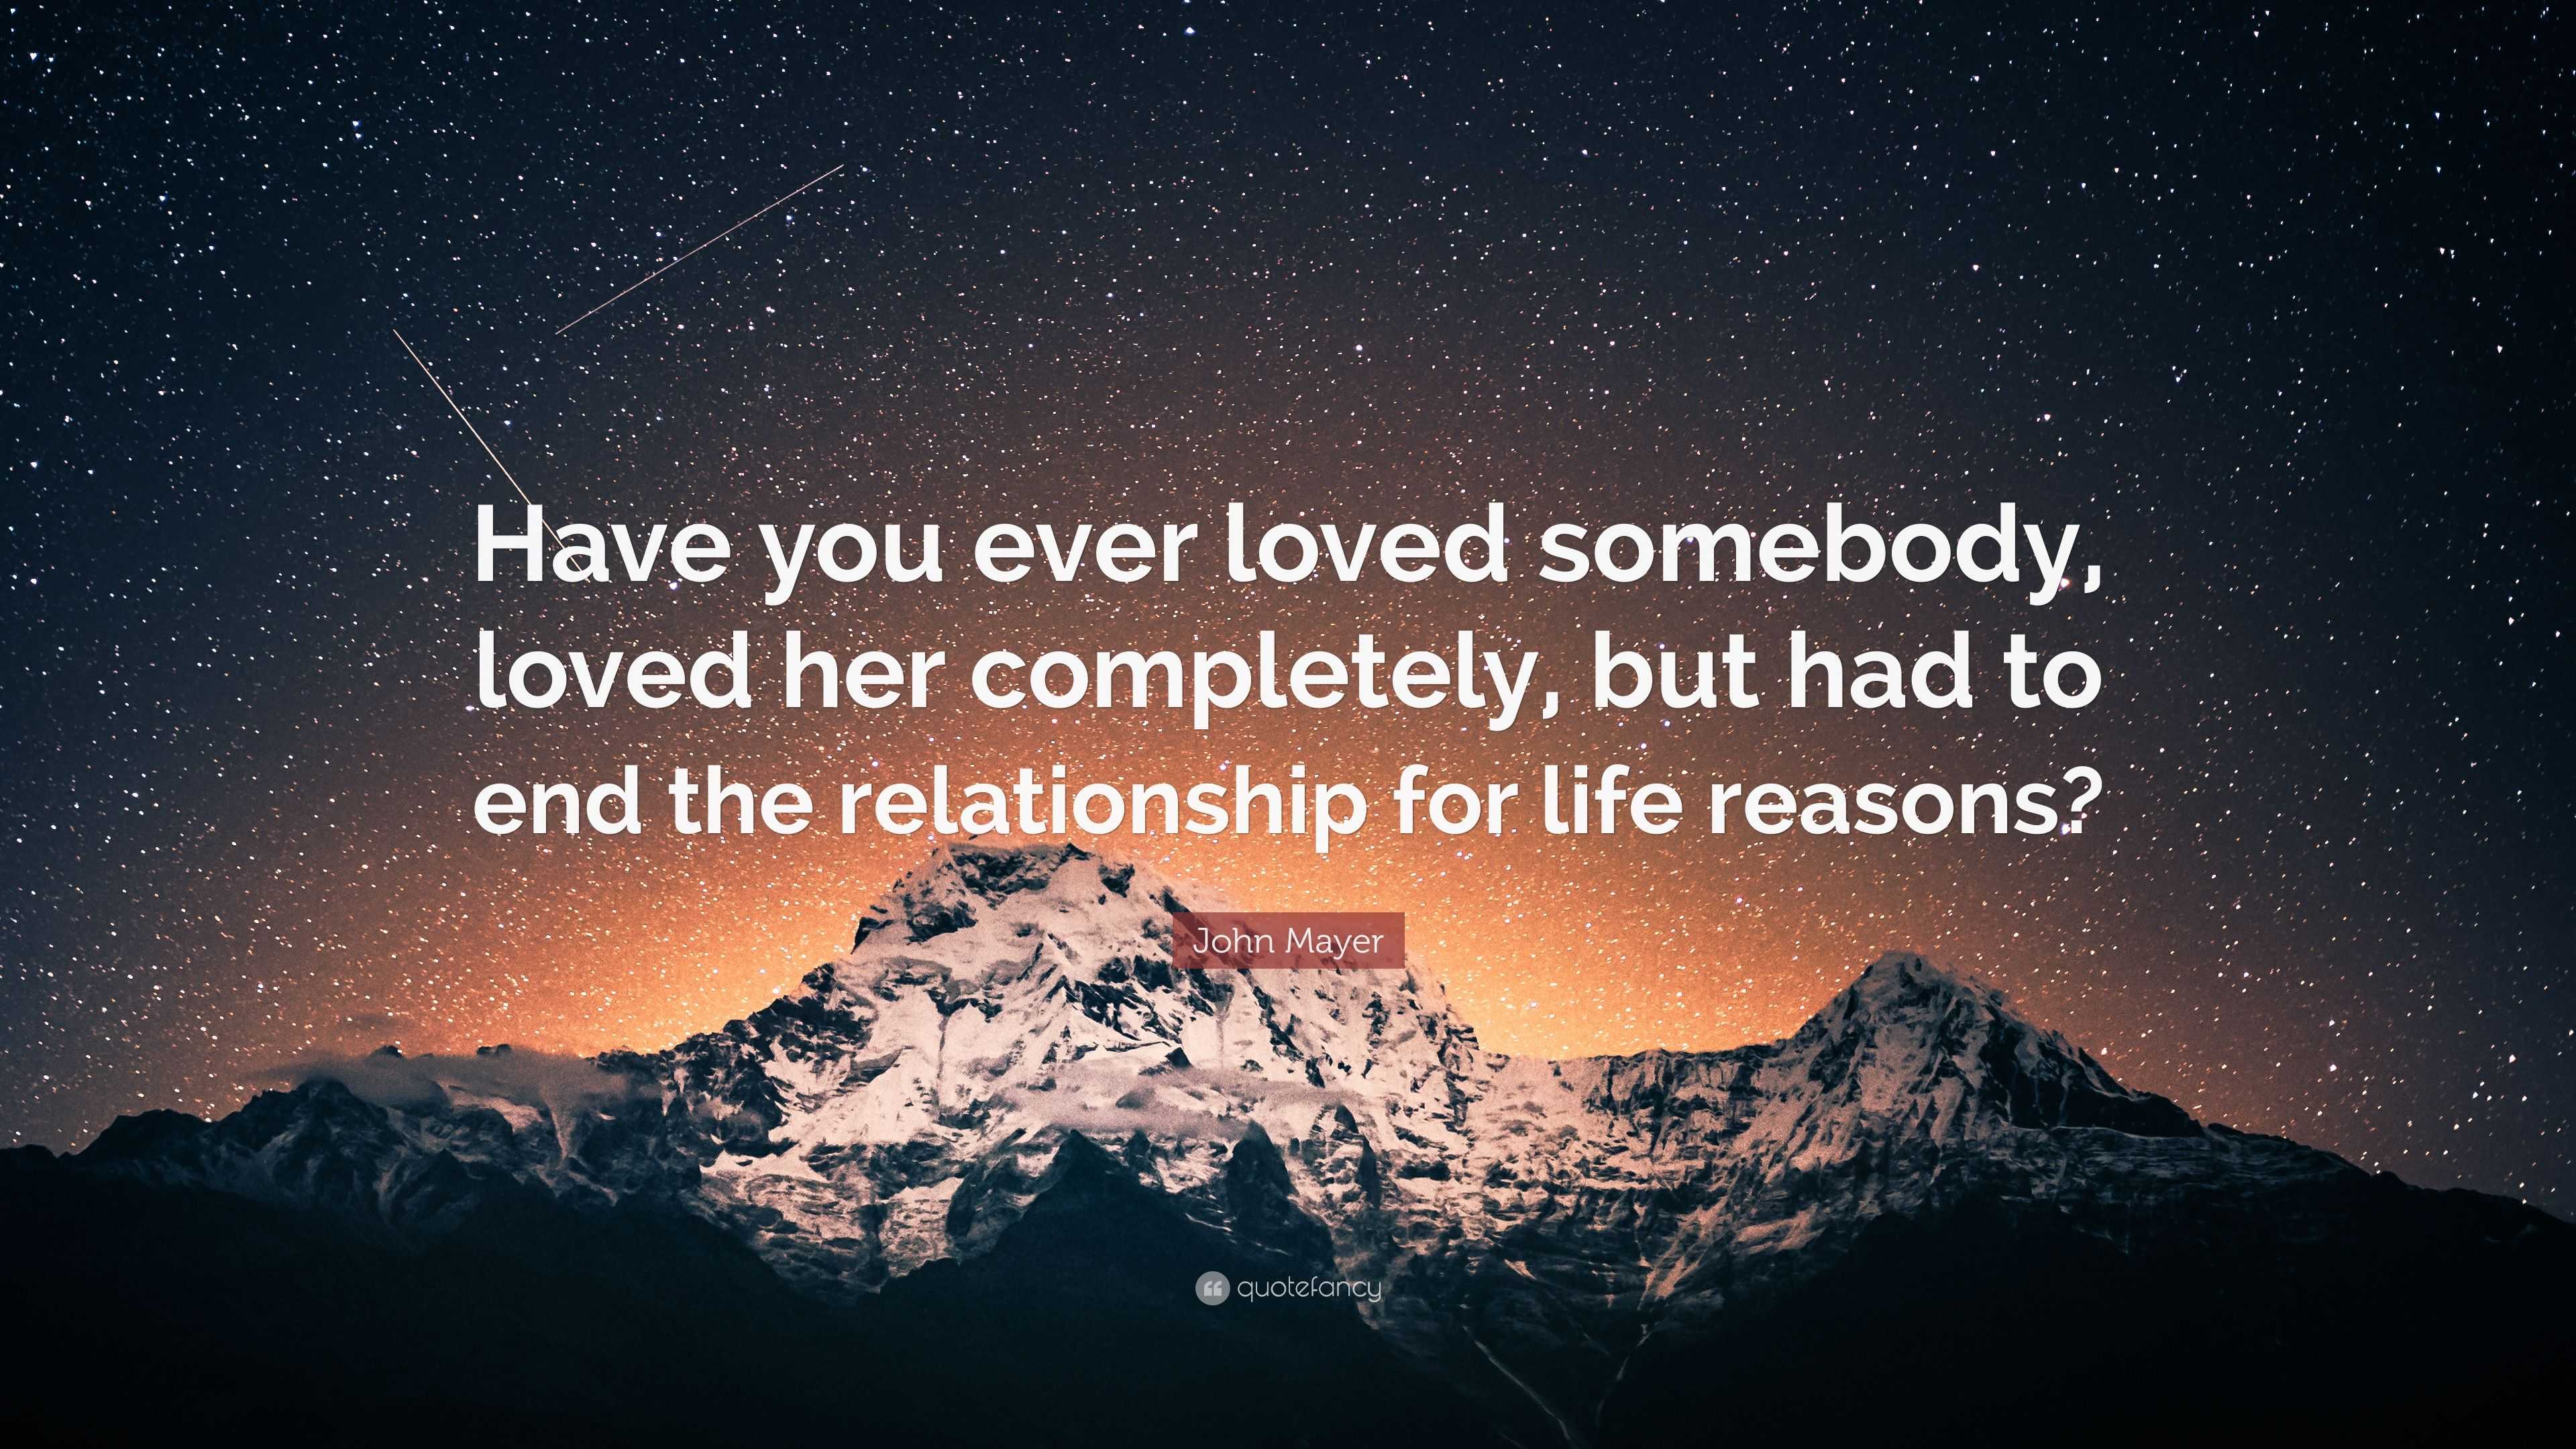 John Mayer Quote: “Have you ever loved somebody, loved her completely ...